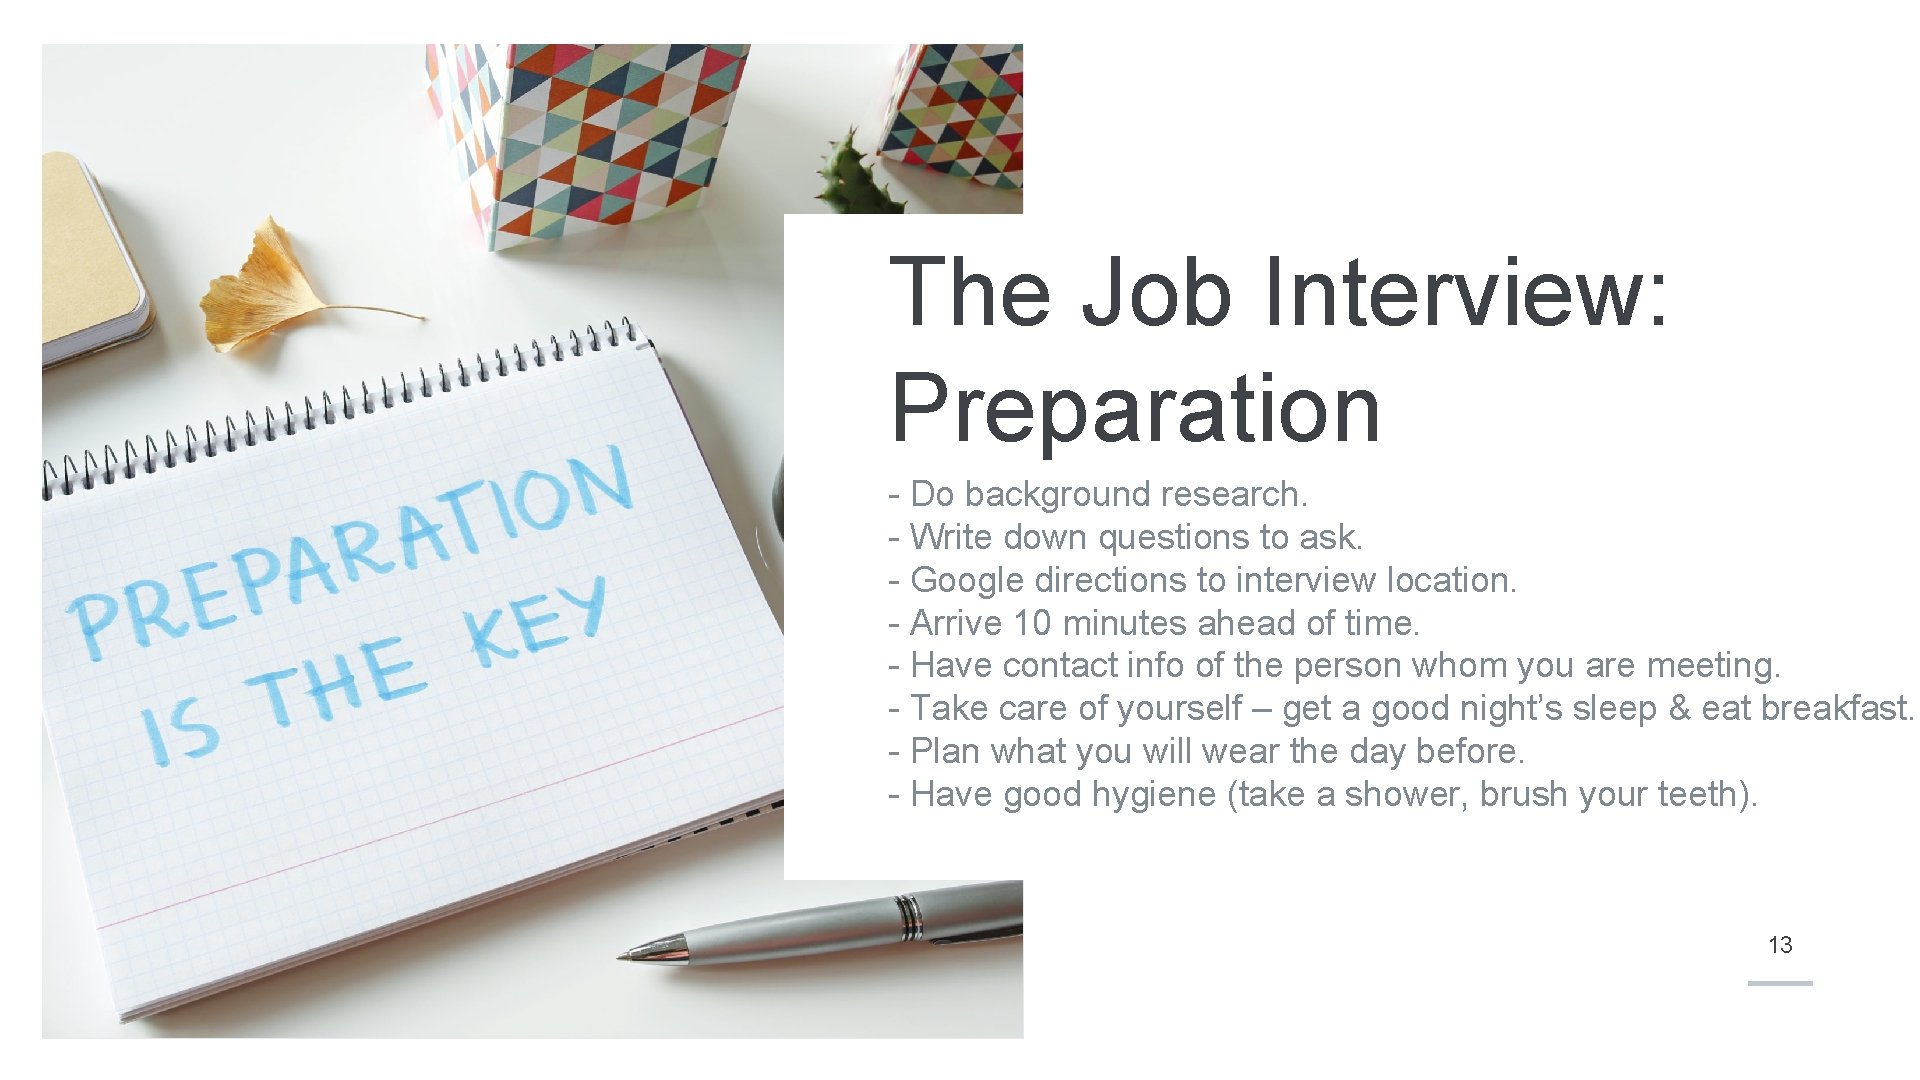 The Job Interview: Preparation - Do background research. - Write down questions to ask.